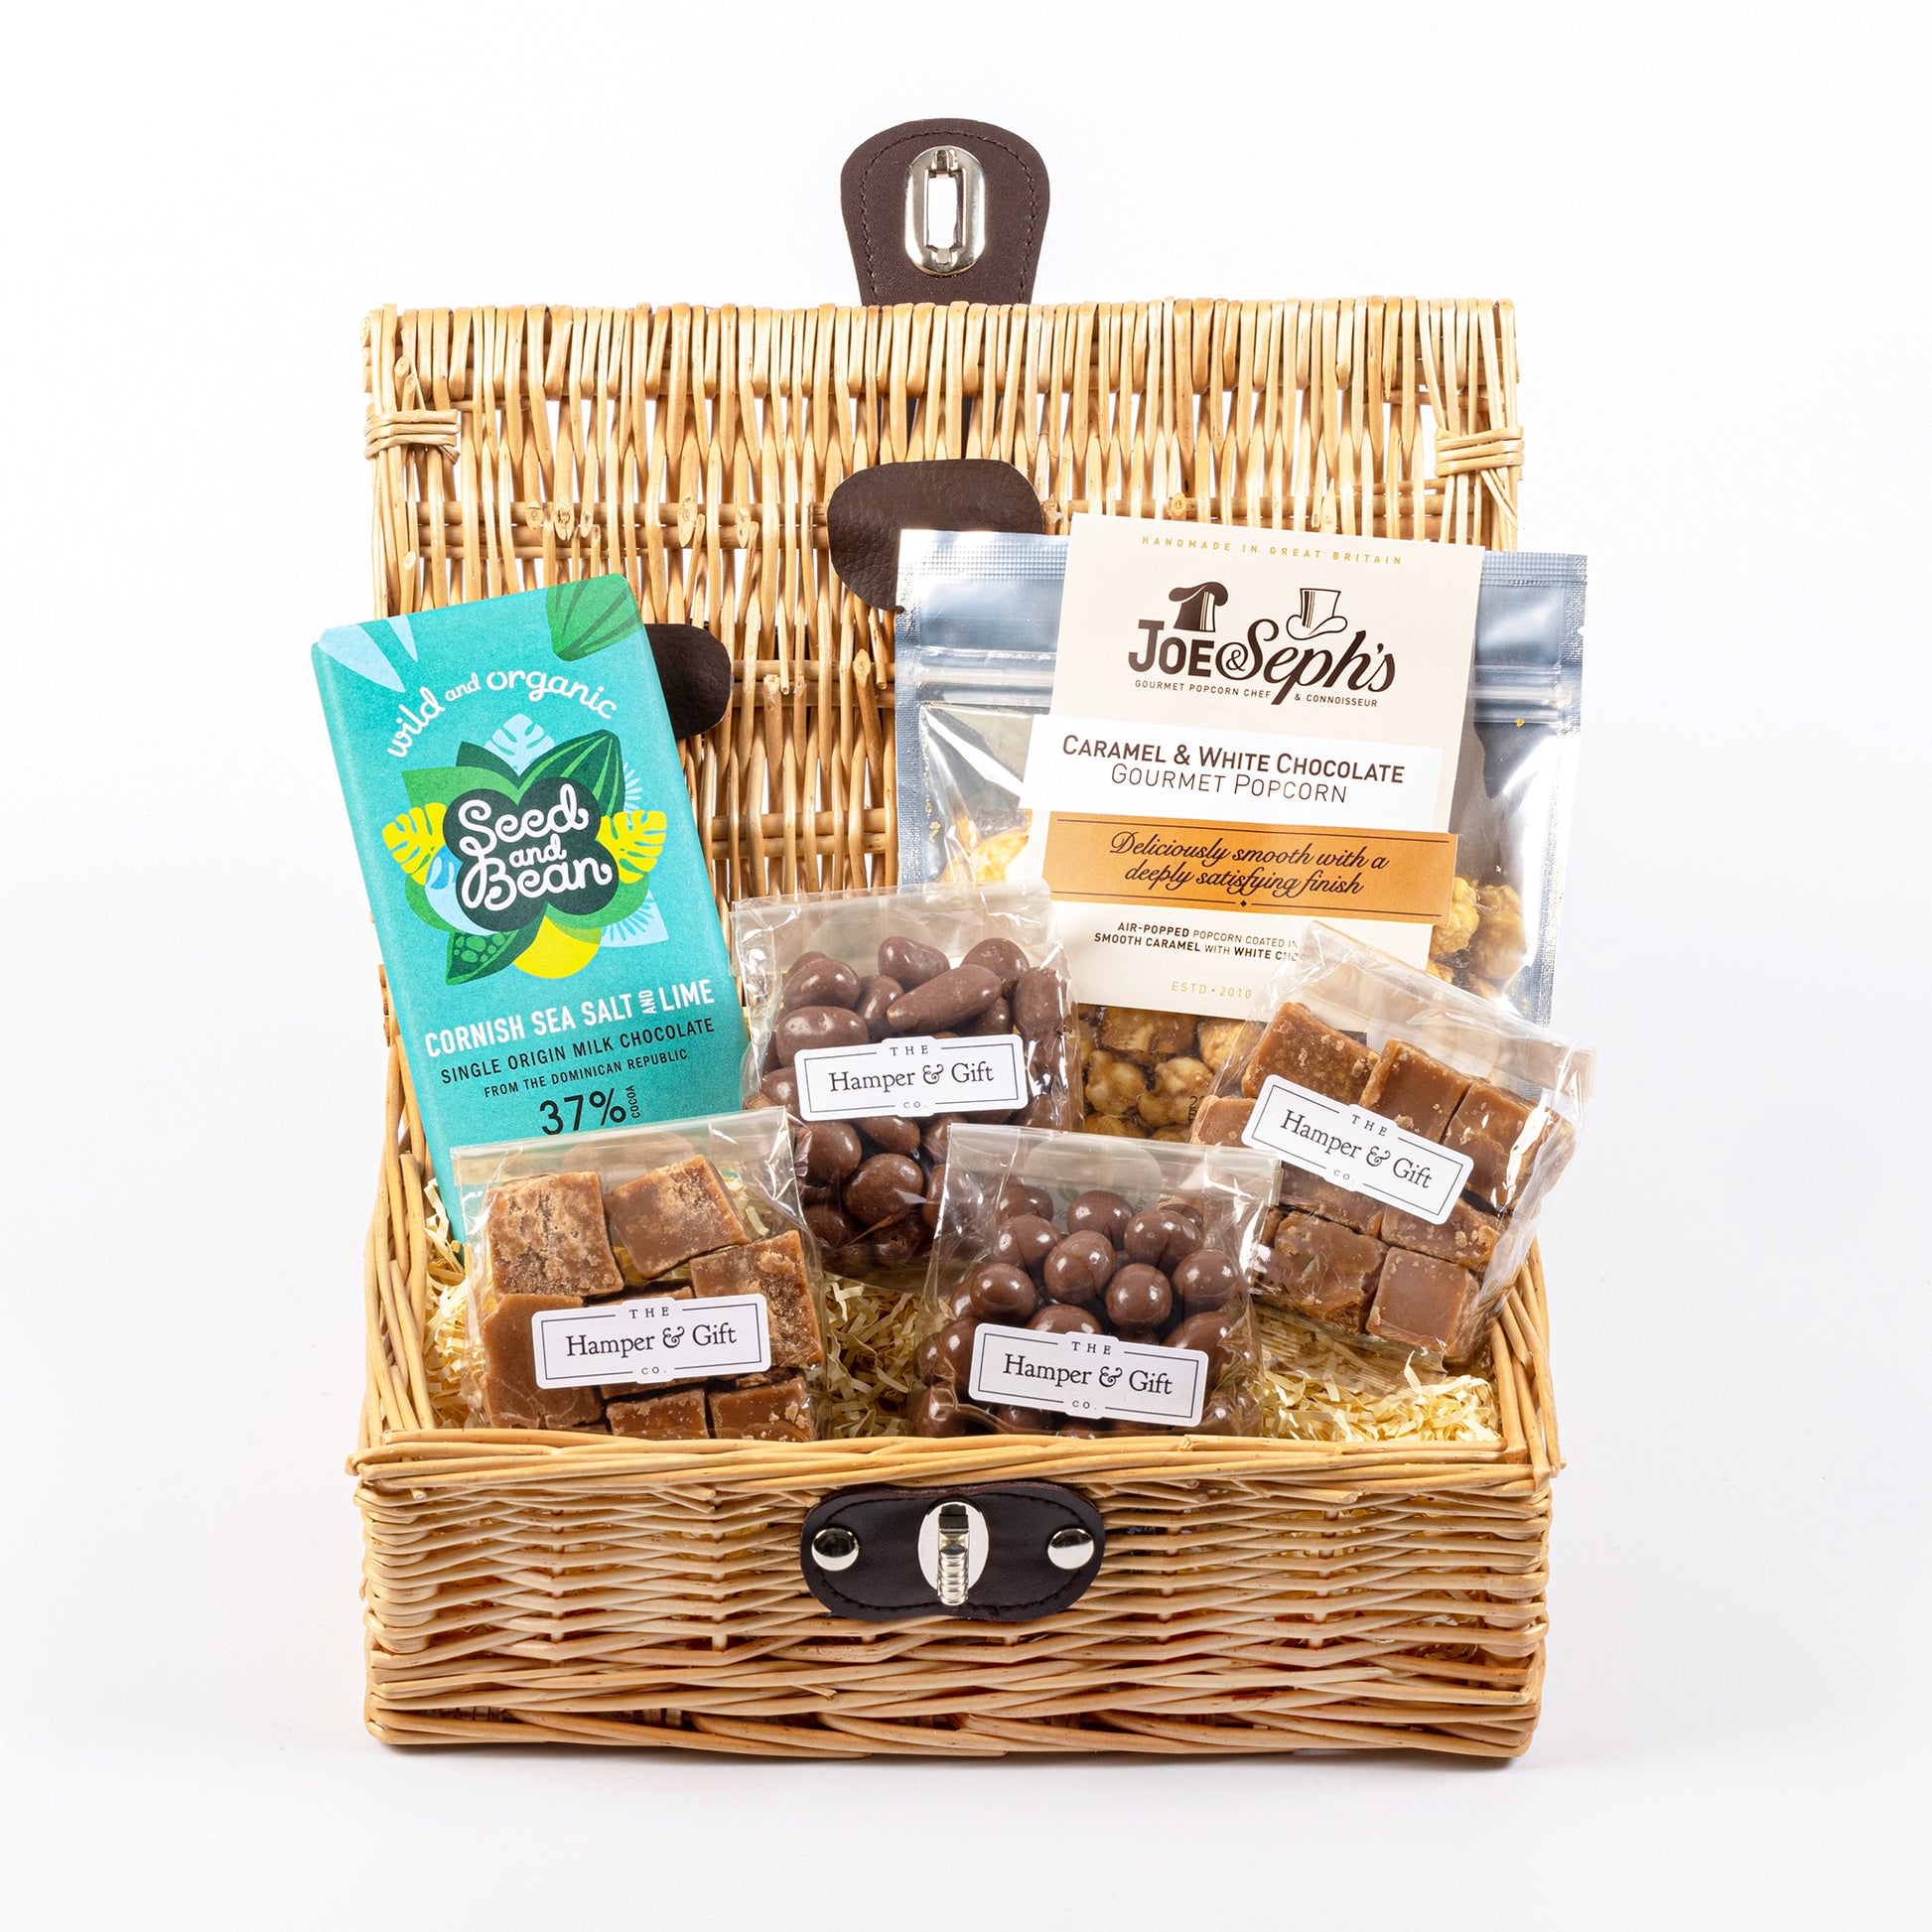 Little Chocolate & Fudge Hamper filled with a variety of chocolate and gourmet popcorn